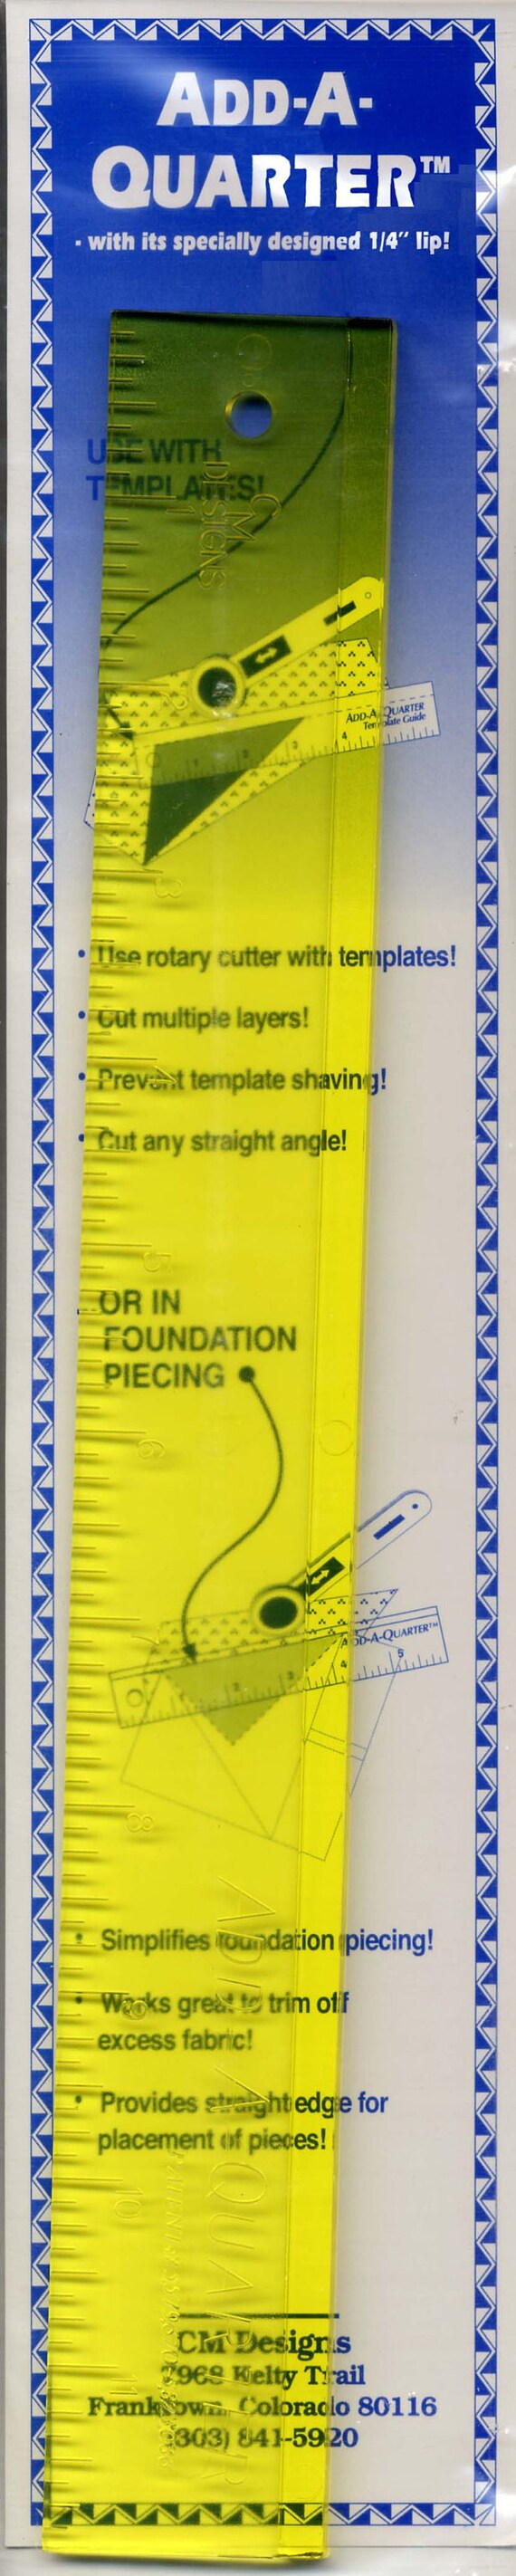 CM Designs Add a Quarter Ruler Yellow Ruler With 1/4 Lip for Paper Piecing  6 Inch Ruler for Paper Piecing Add a Quarter Inch -  Israel